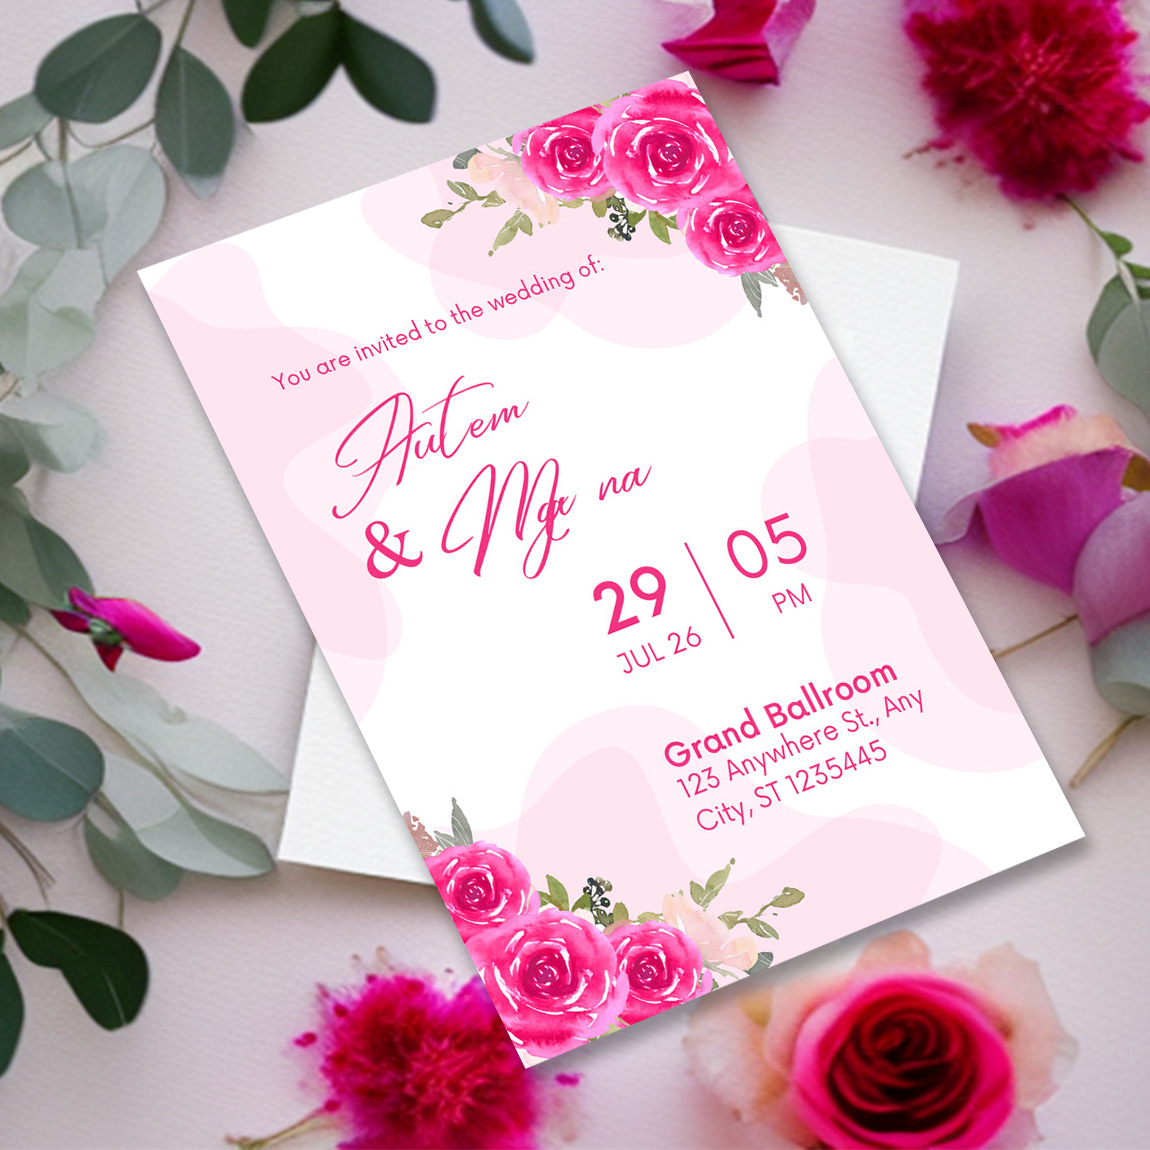 Image of charming wedding invitation with flowers and leaves.